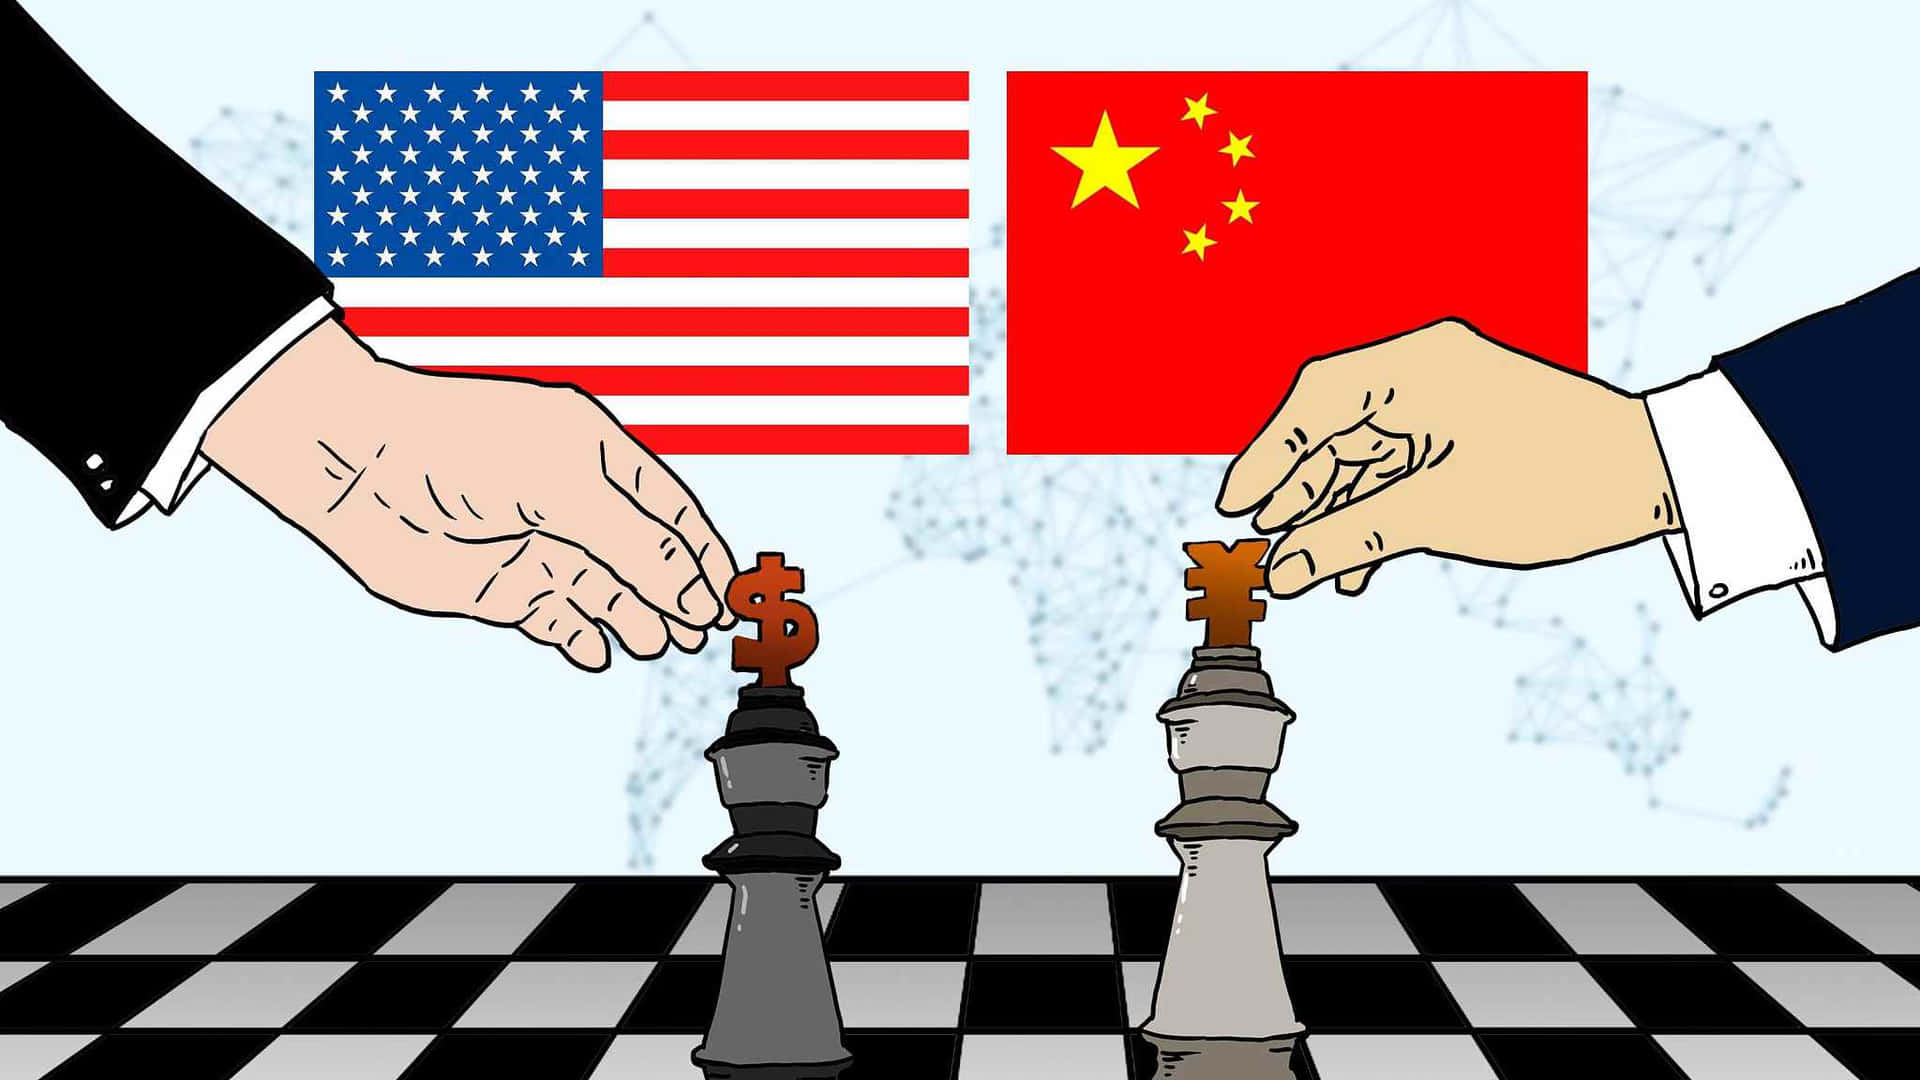 Two Men Are Shaking Hands On A Chess Board With A Chinese Flag